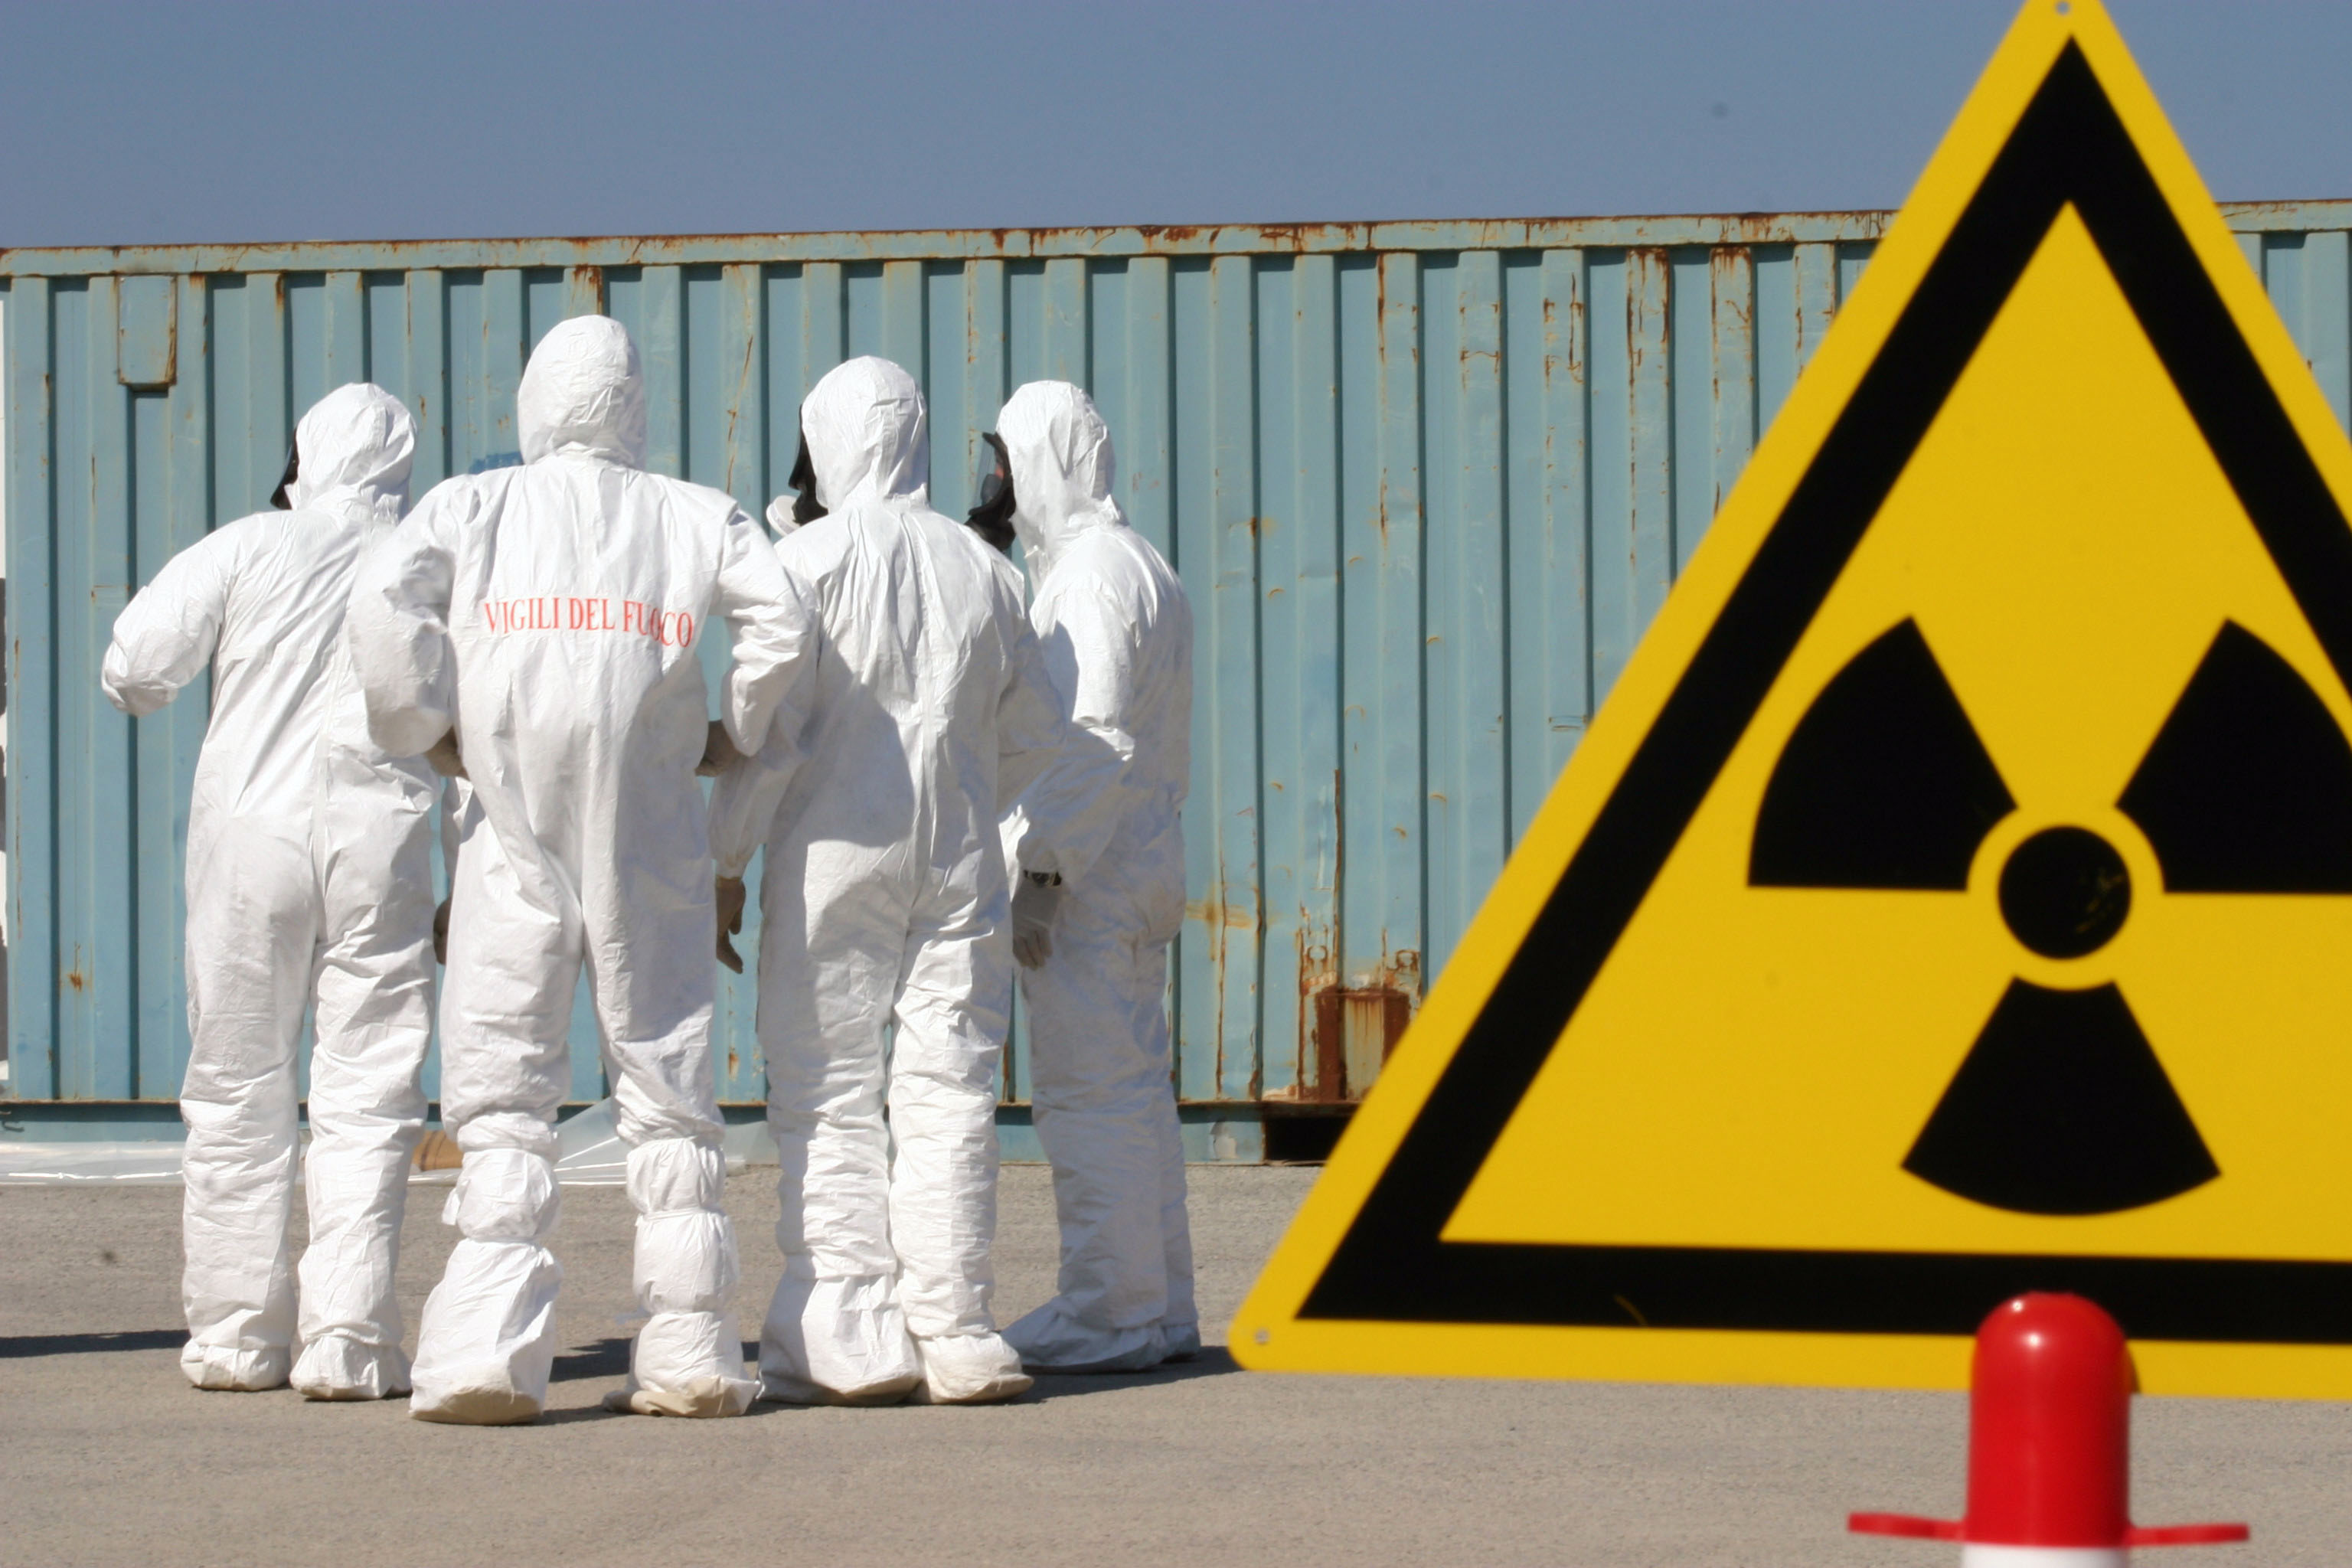  Italian firefighters dressed in chemical, biological, radiological (CBR) suits set up a perimeter of signs around a container suspected of carrying weapons of mass destruction (WMD) during a US led exercise in 2004. US Navy Photo 